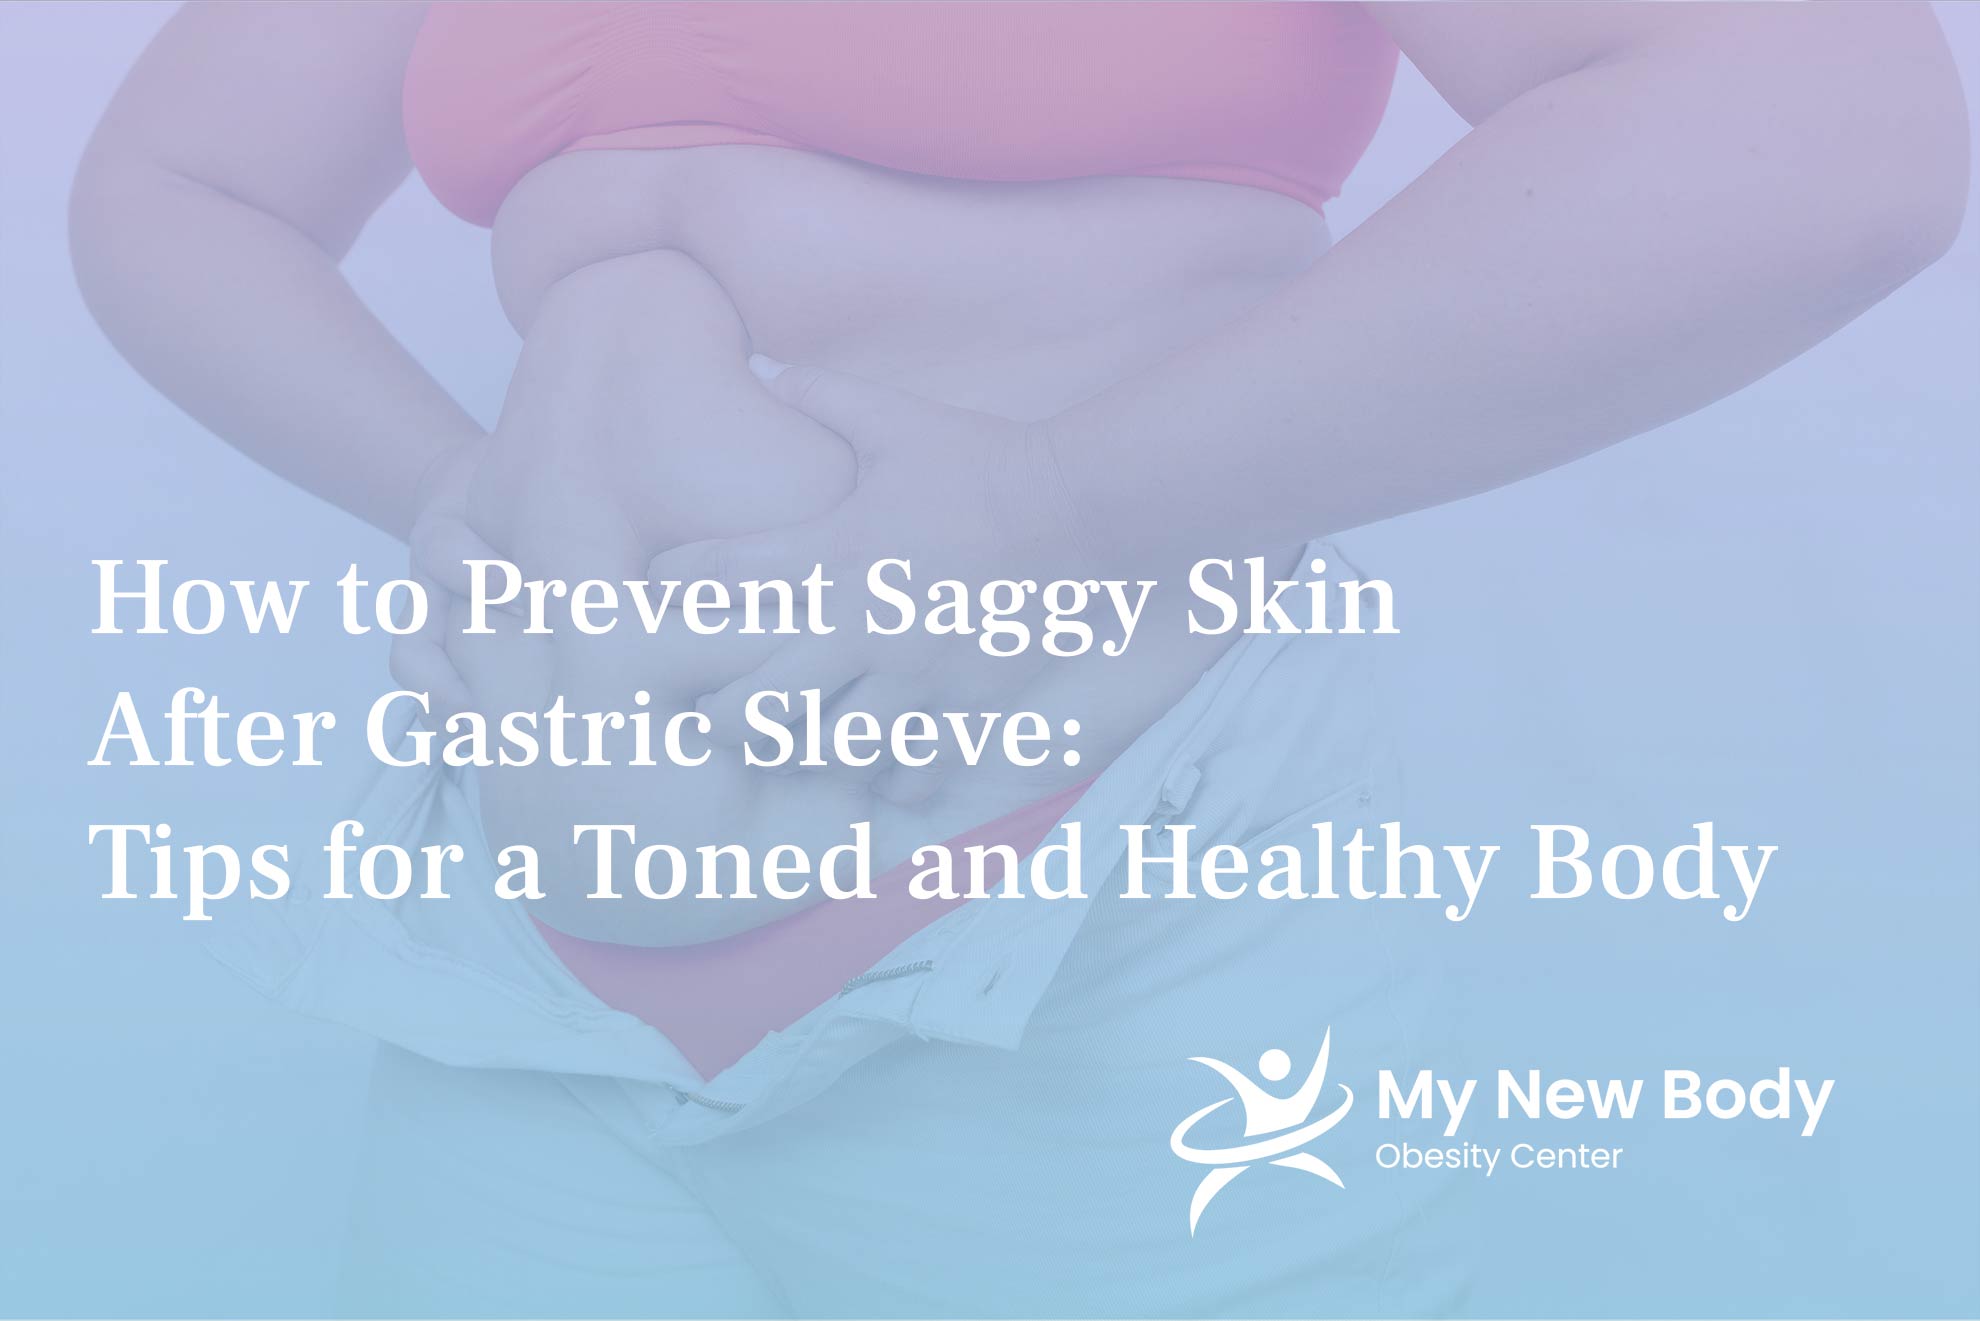 How to prevent saggy skin after gastric sleeve